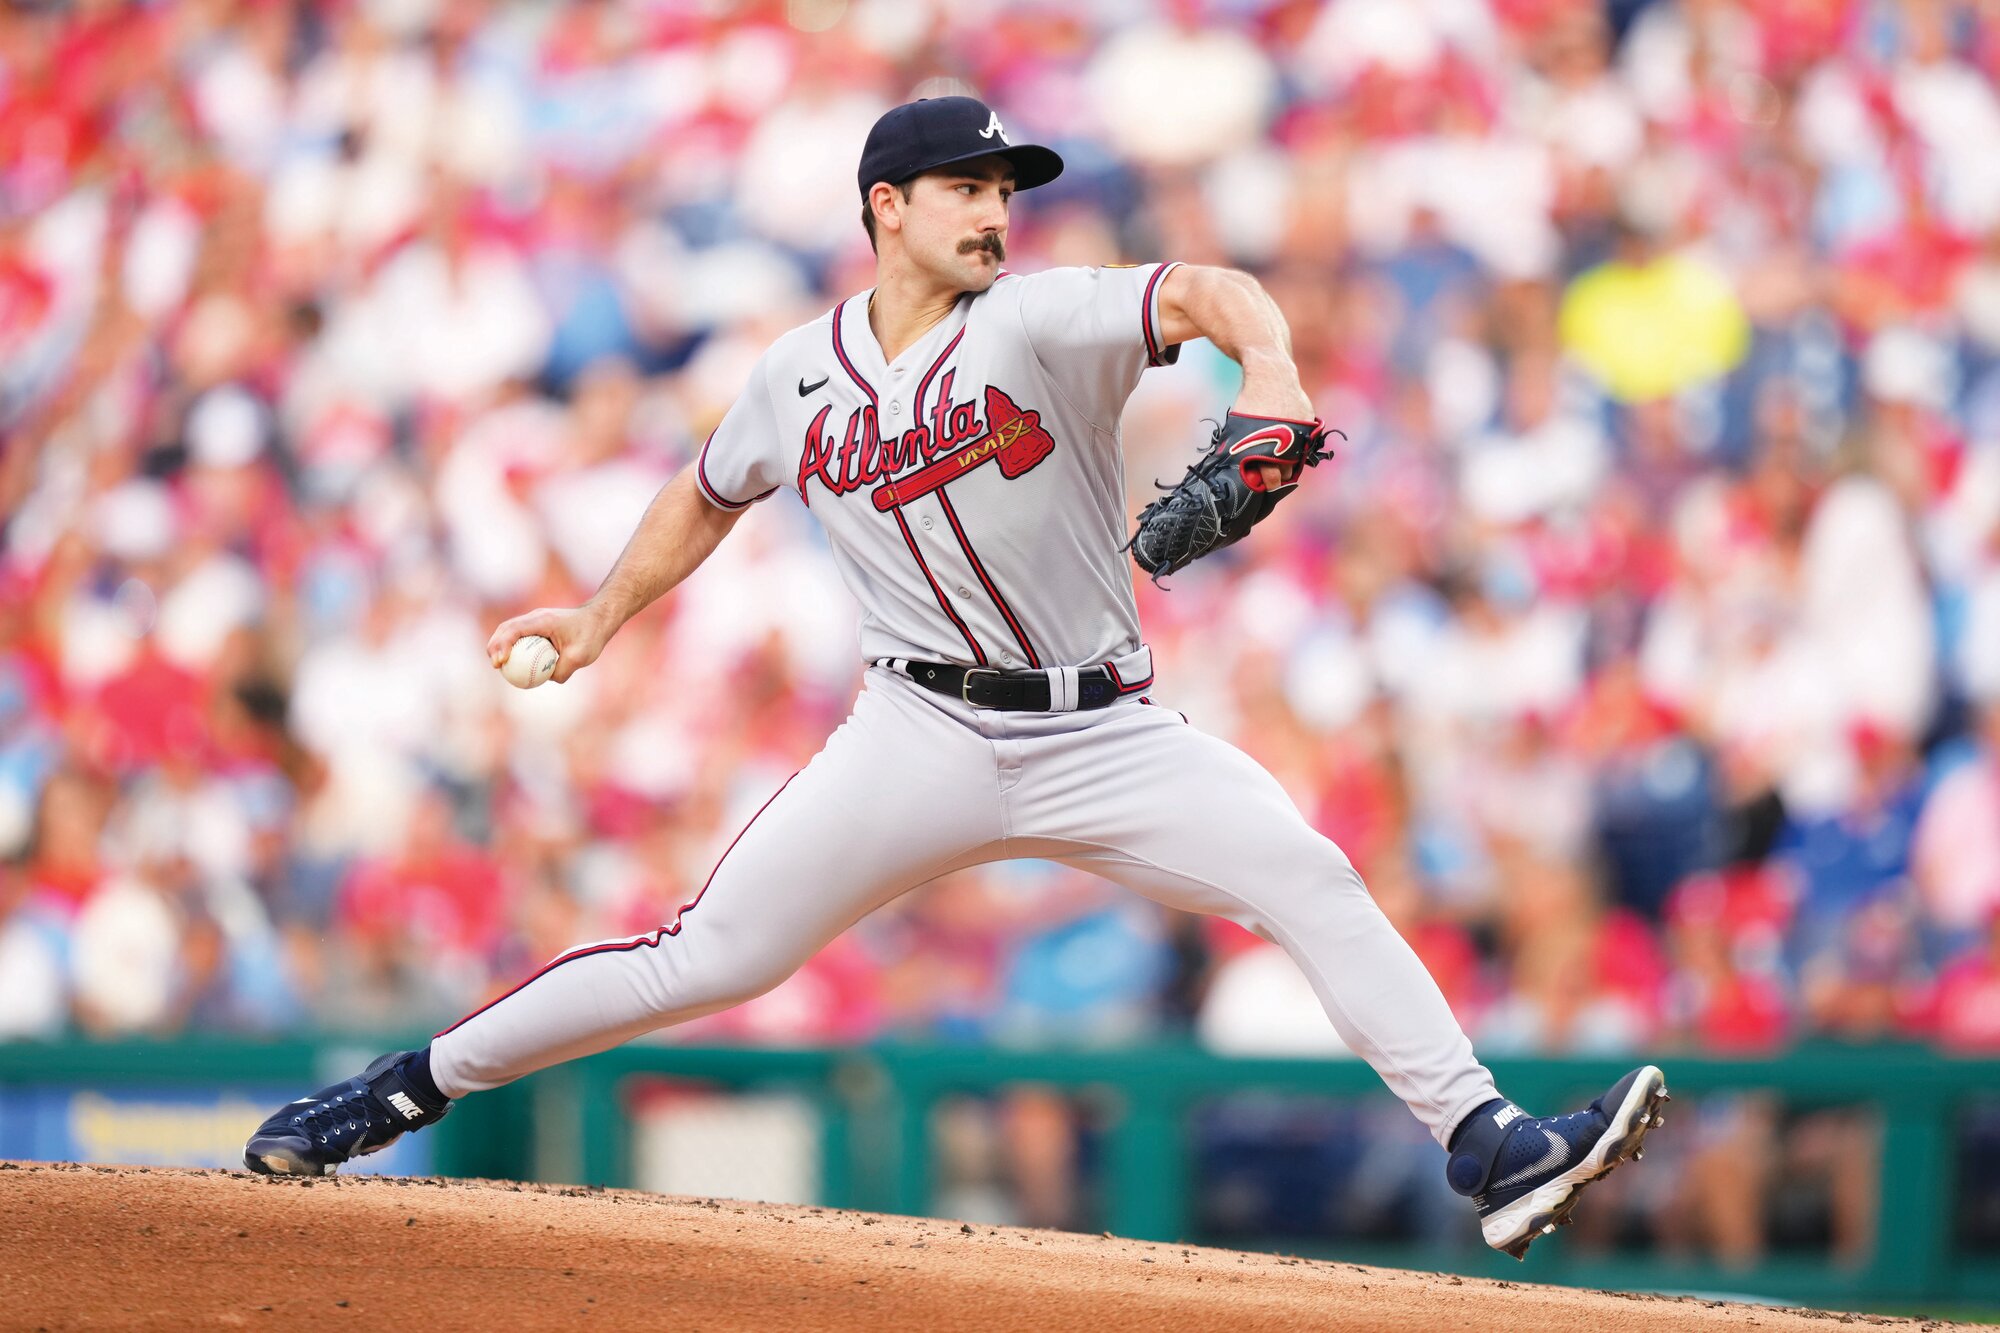 Strider fans 9 as Braves beat rival Phillies 4-2 - The Sumter Item